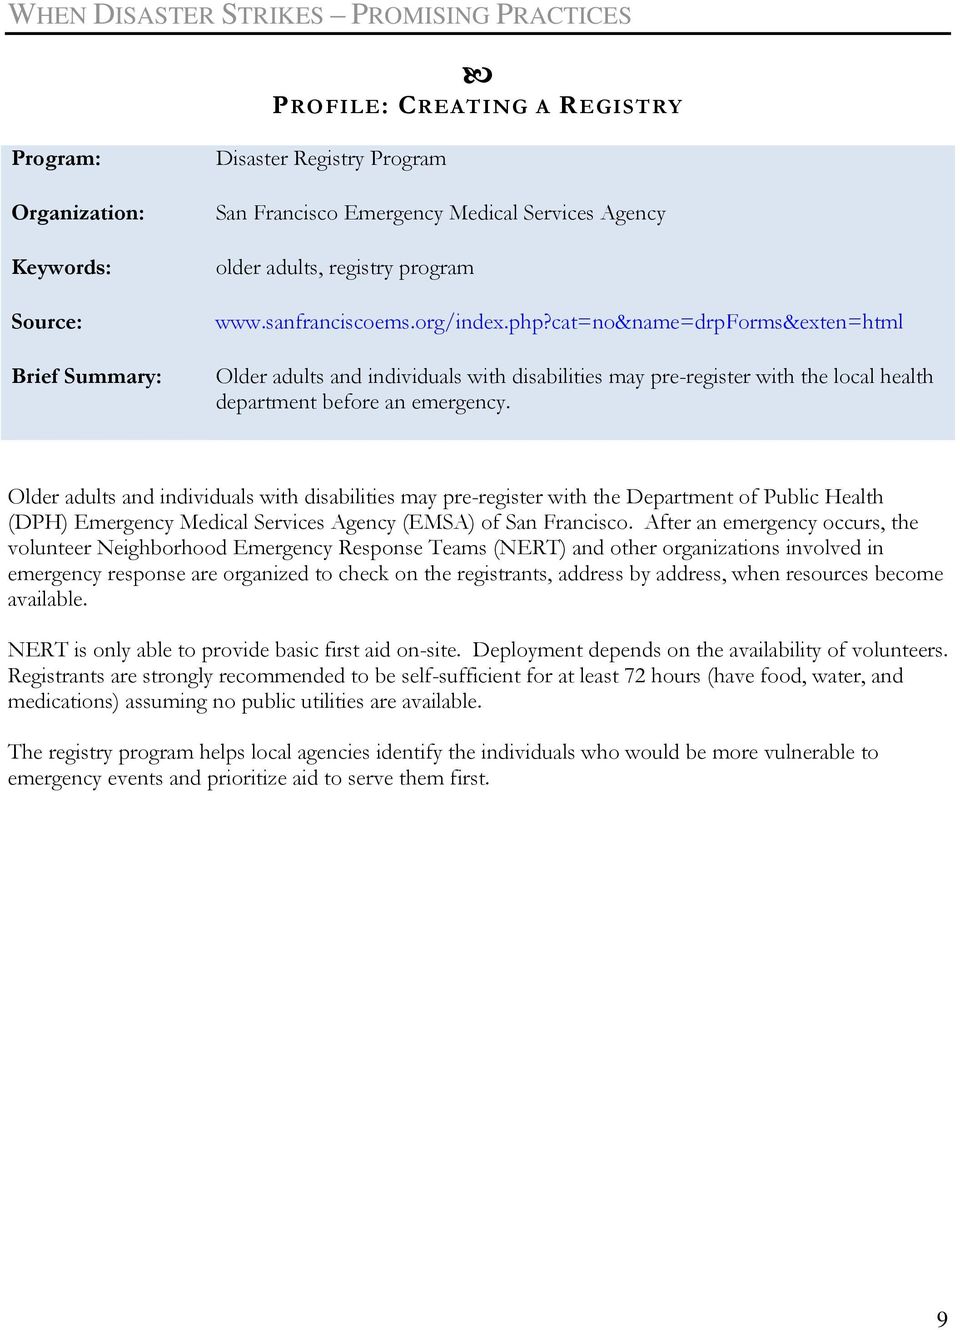 Older adults and individuals with disabilities may pre-register with the Department of Public Health (DPH) Emergency Medical Services Agency (EMSA) of San Francisco.